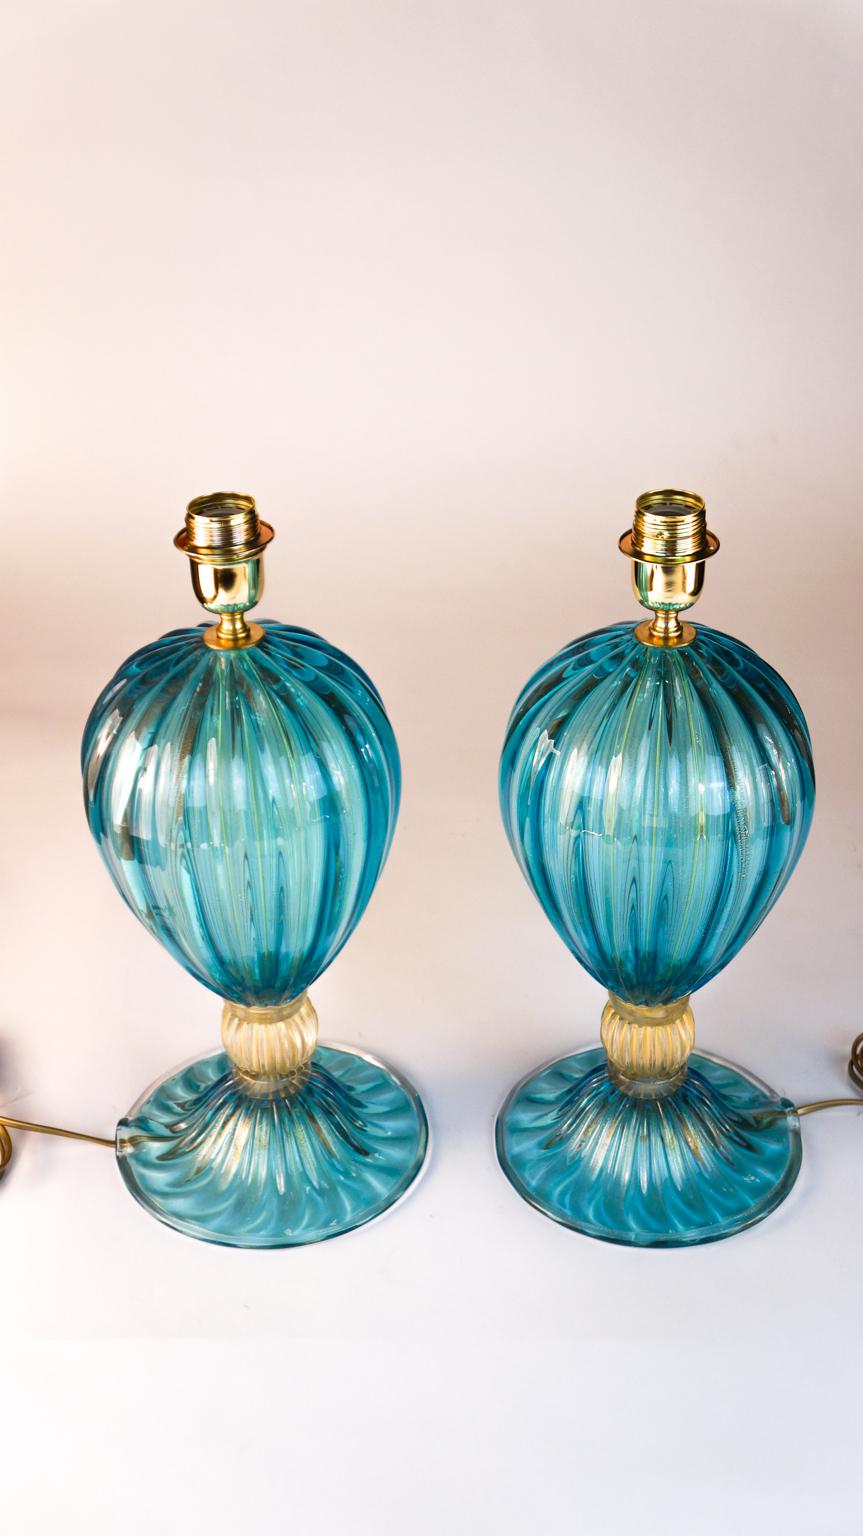 Exclusive pair of Murano glass table lamps aquamarine colour with details in 24 carat gold leaf.
By touching the lamps, you can hear the various grooves made especially by the 